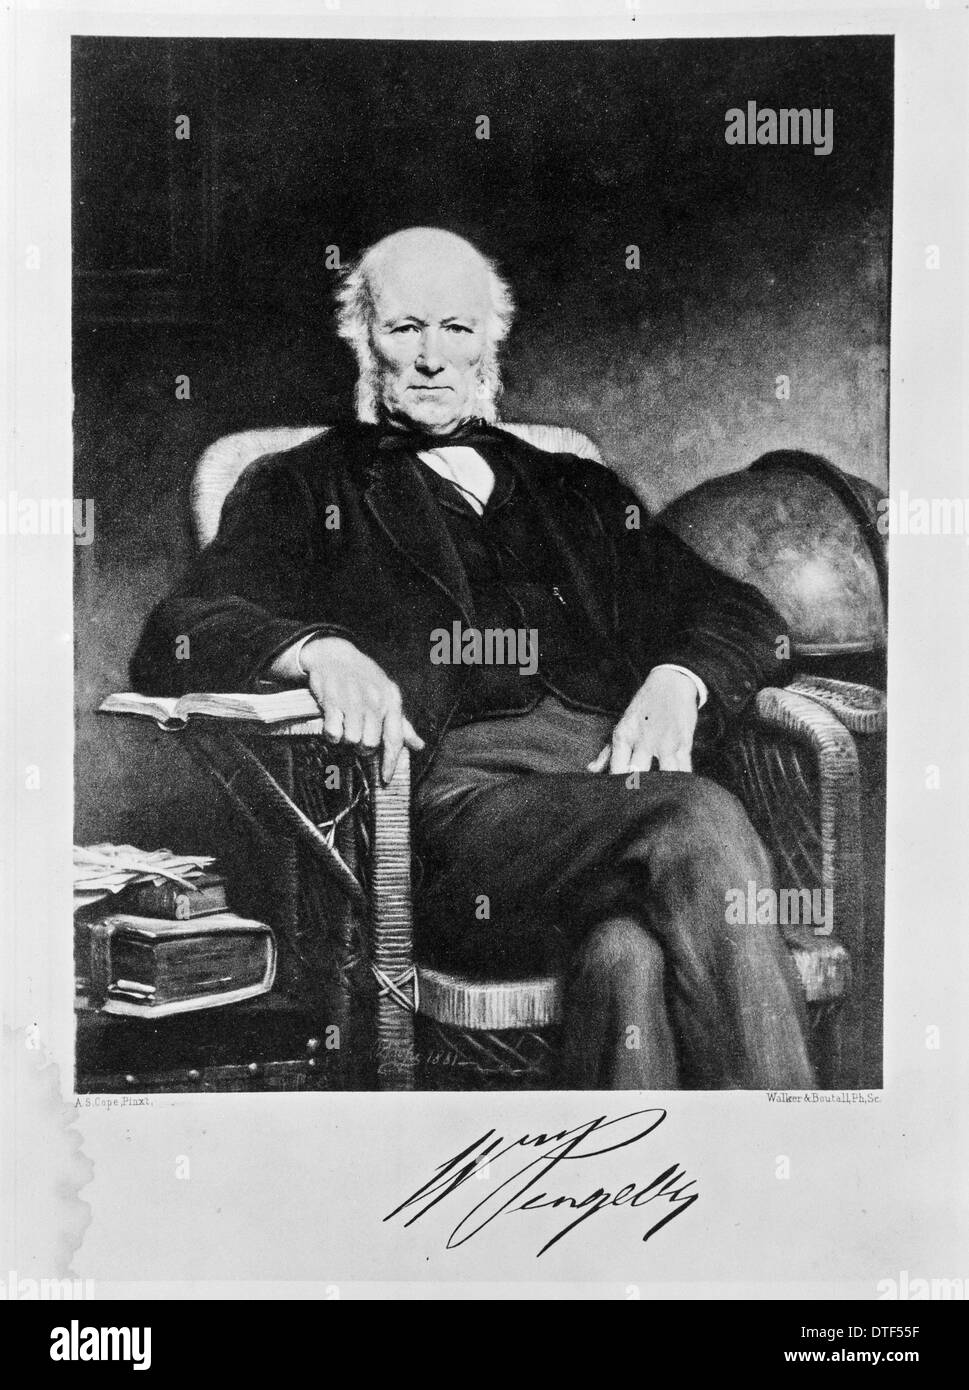 William Pengelly (1812-1894) Banque D'Images